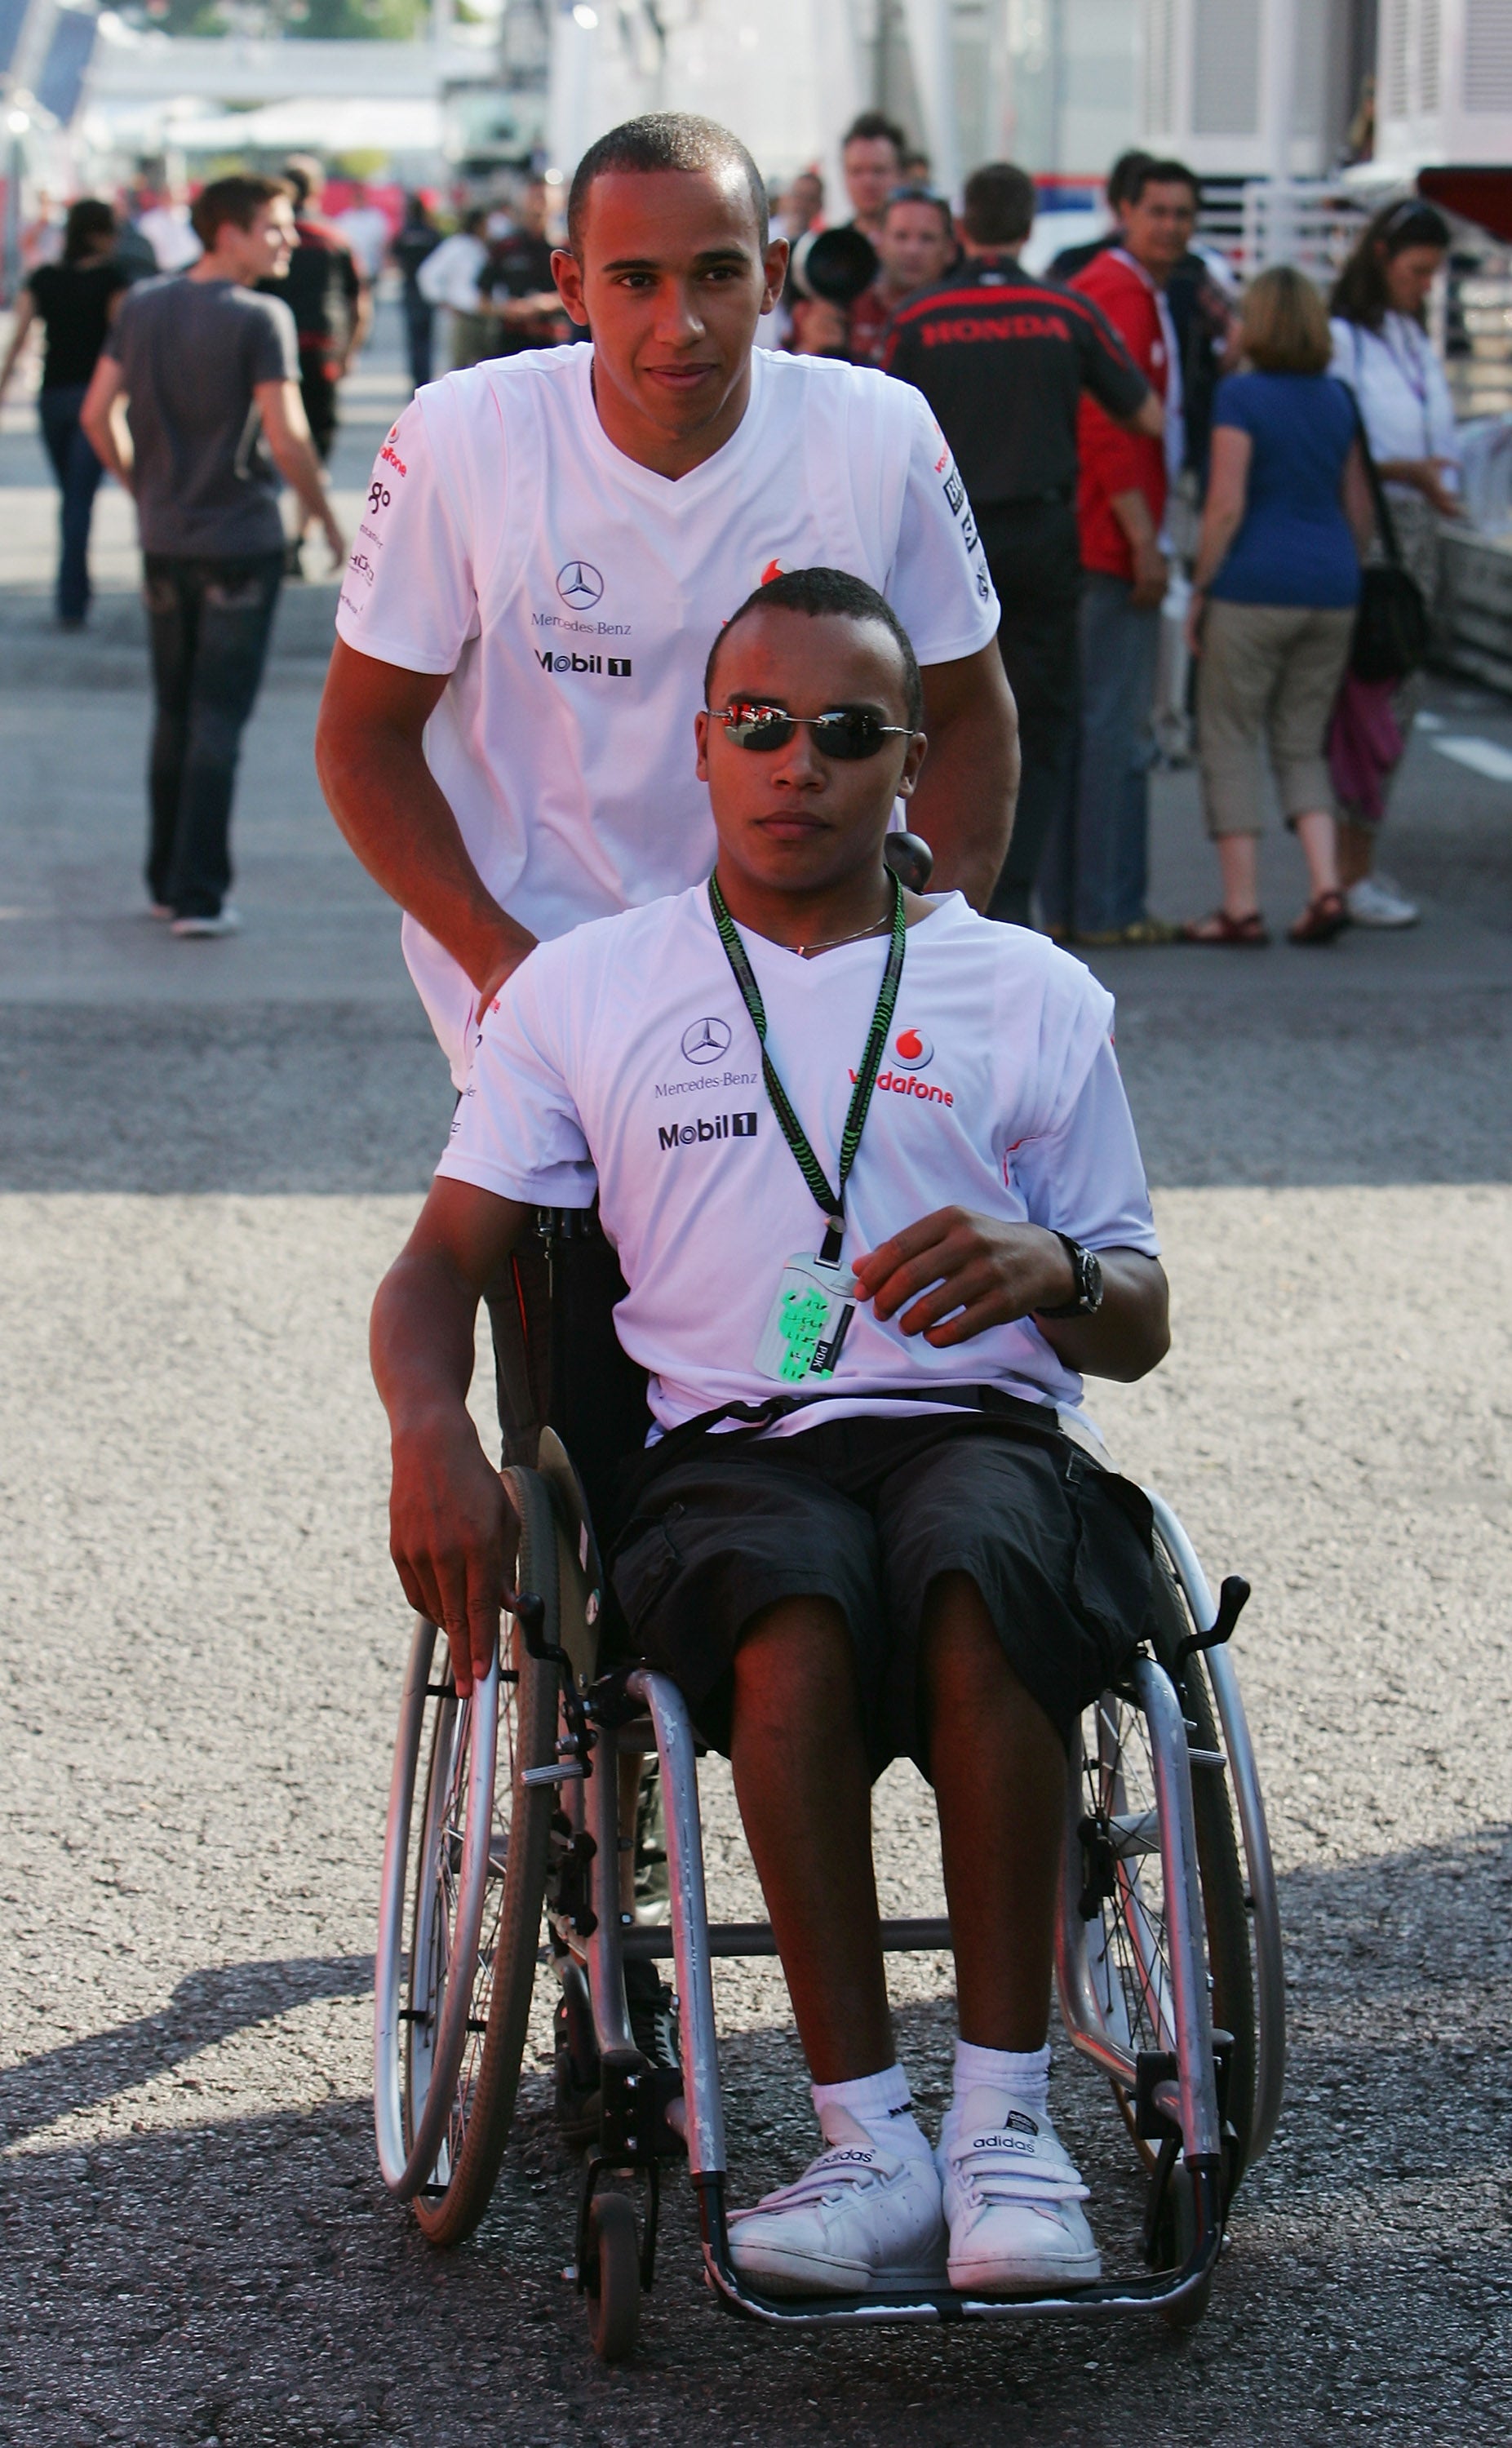 Nic was in a wheelchair when Lewis first raced in F1 – but he now doesn’t use a wheelchair at all